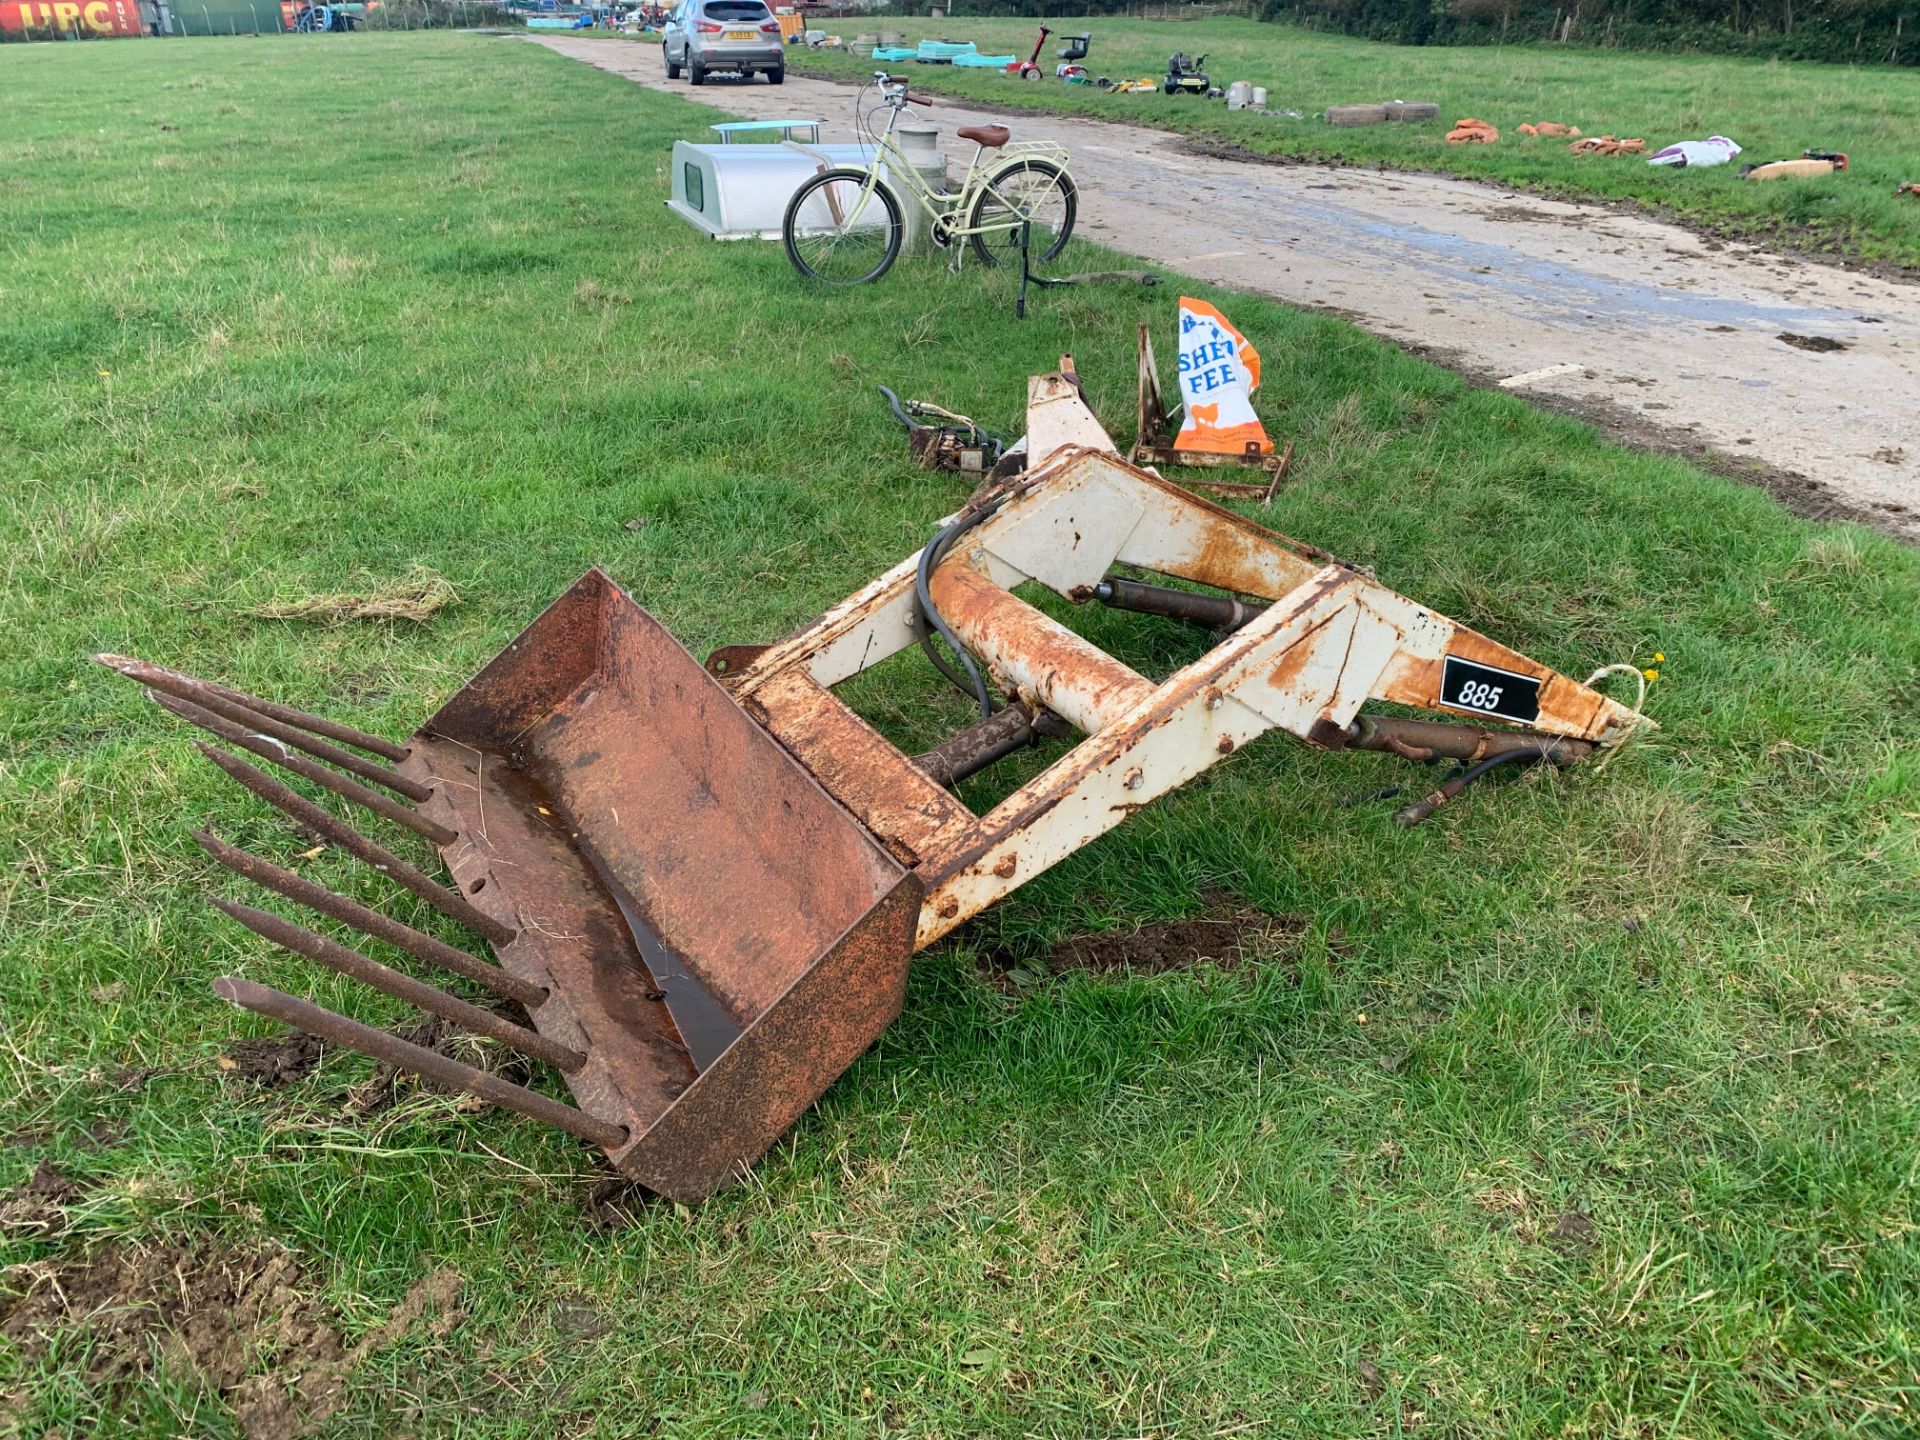 David Brown 885 front loader with brackets